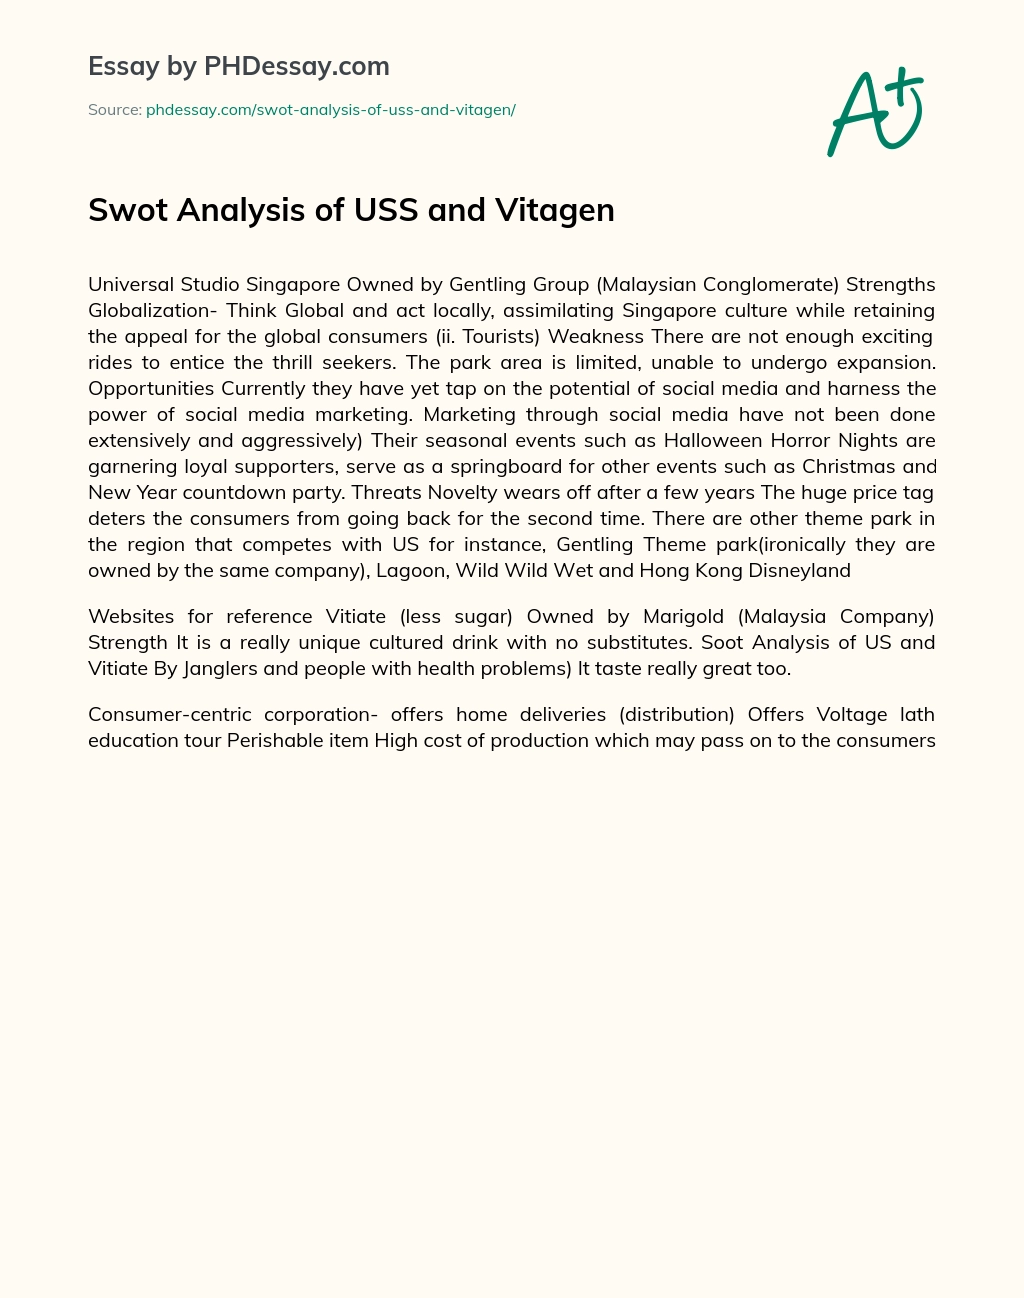 Swot Analysis of USS and Vitagen essay